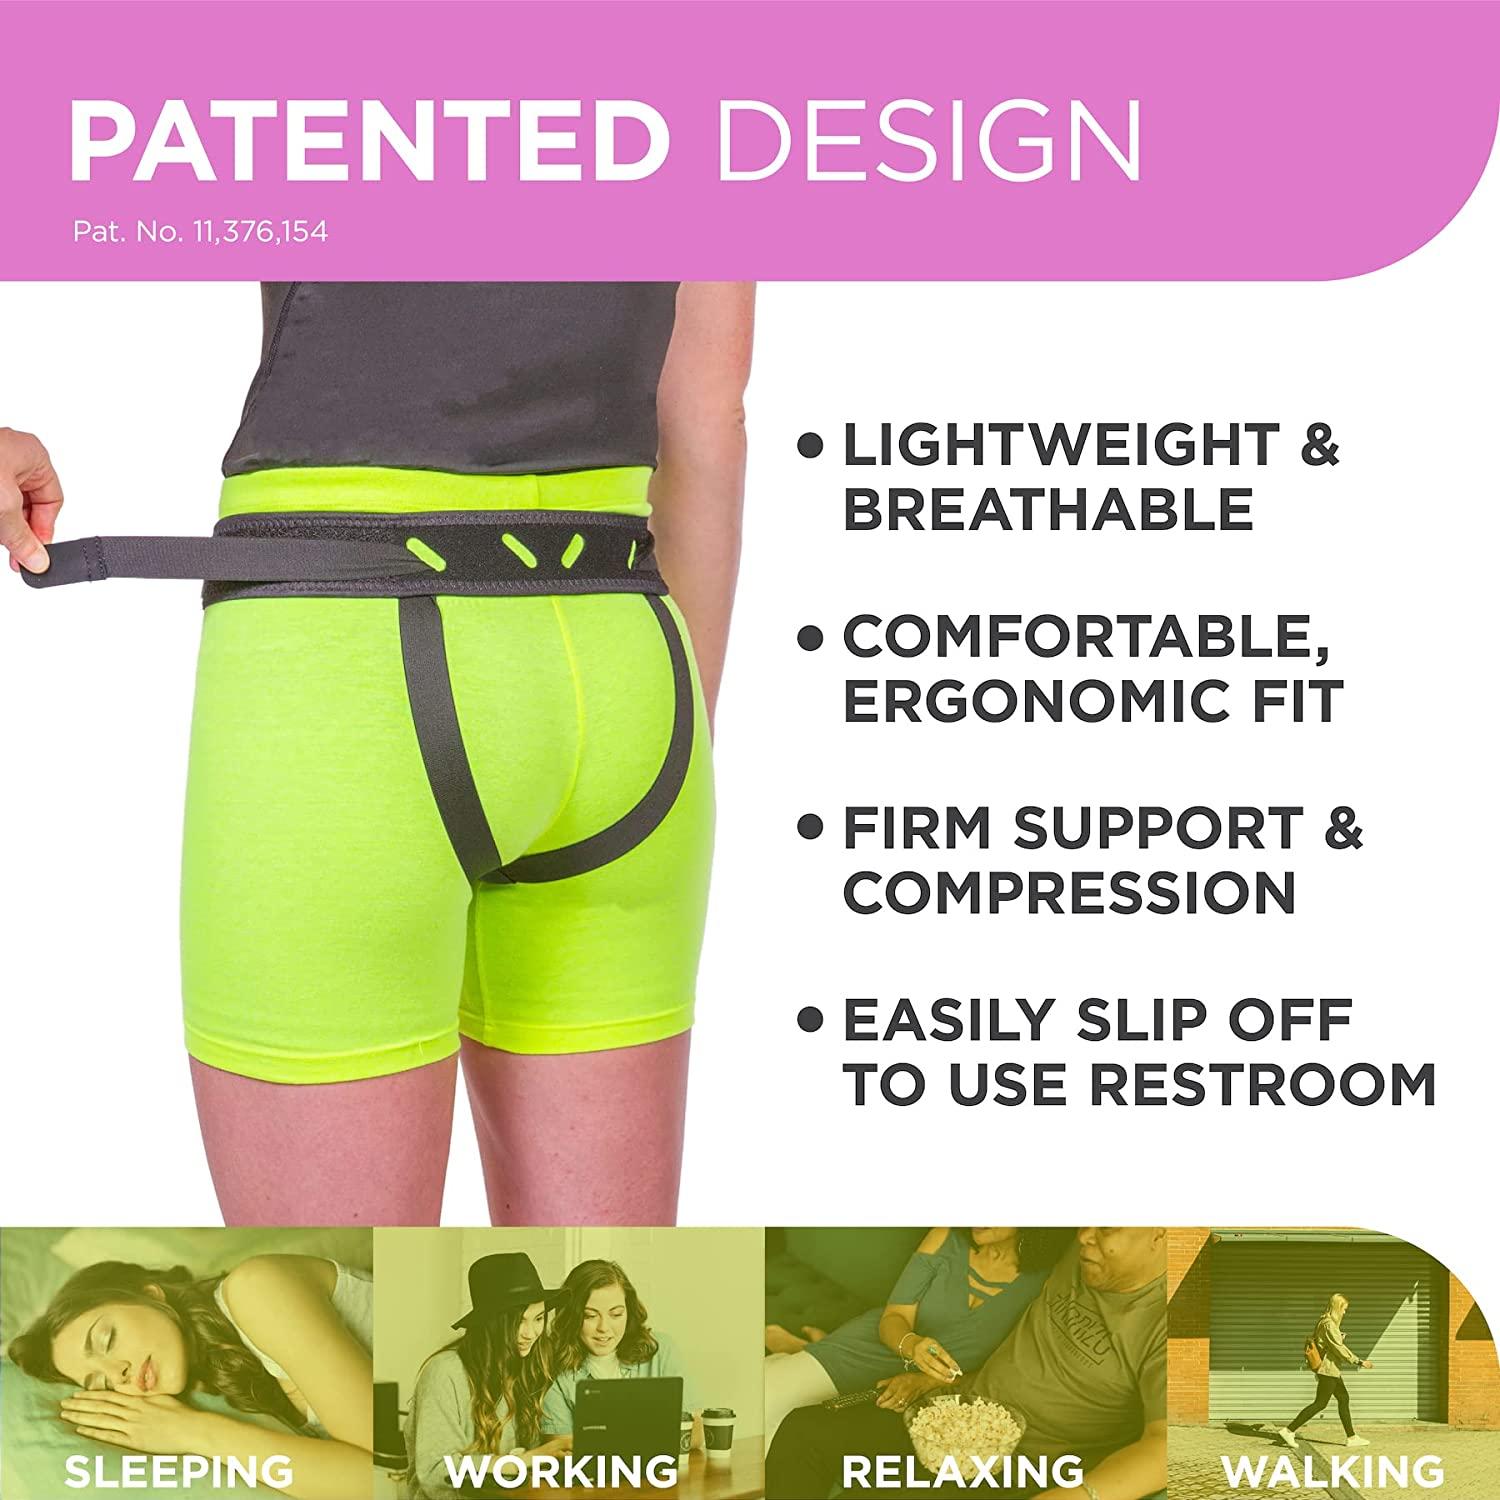 The Pelvic Pro by BraceAbility - Patented Prolapse Uterus Support